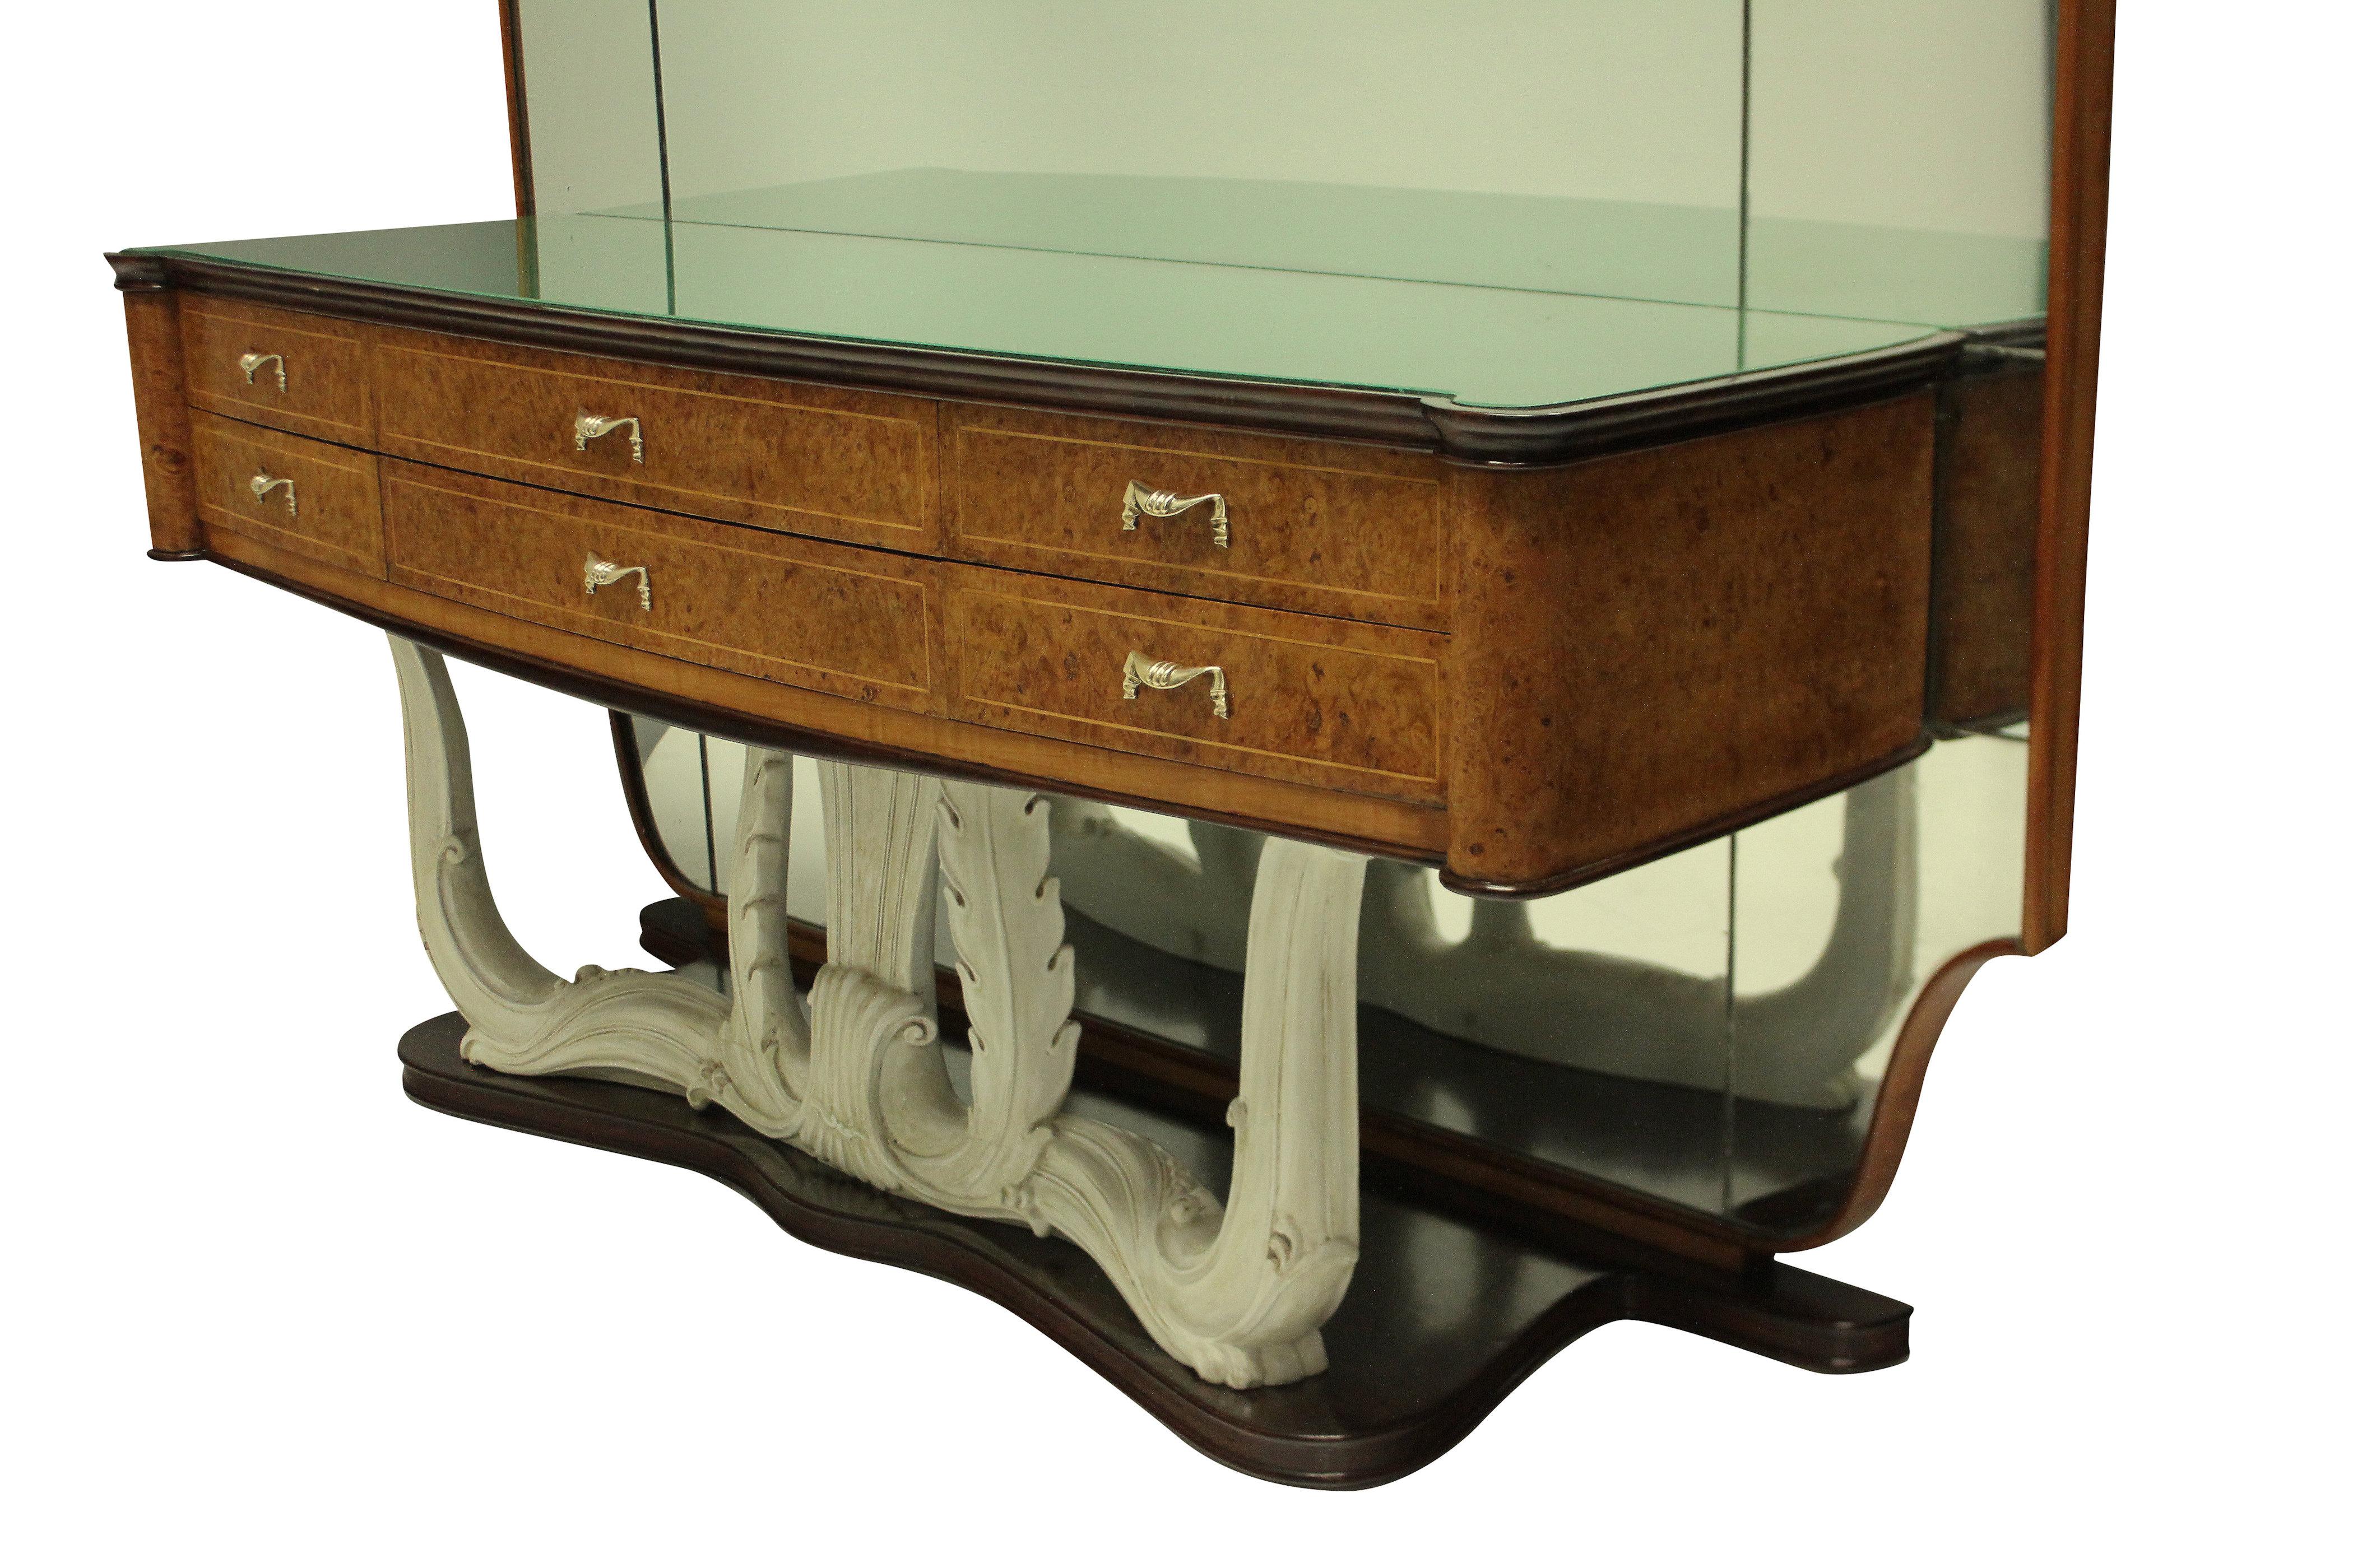 A stylish Italian mid-century hall console with full length mirror with sconces. The console with six drawers in walnut root, with brass handles, a carved faux ivory base and it's original green glass inset top. The mirror is framed in walnut and